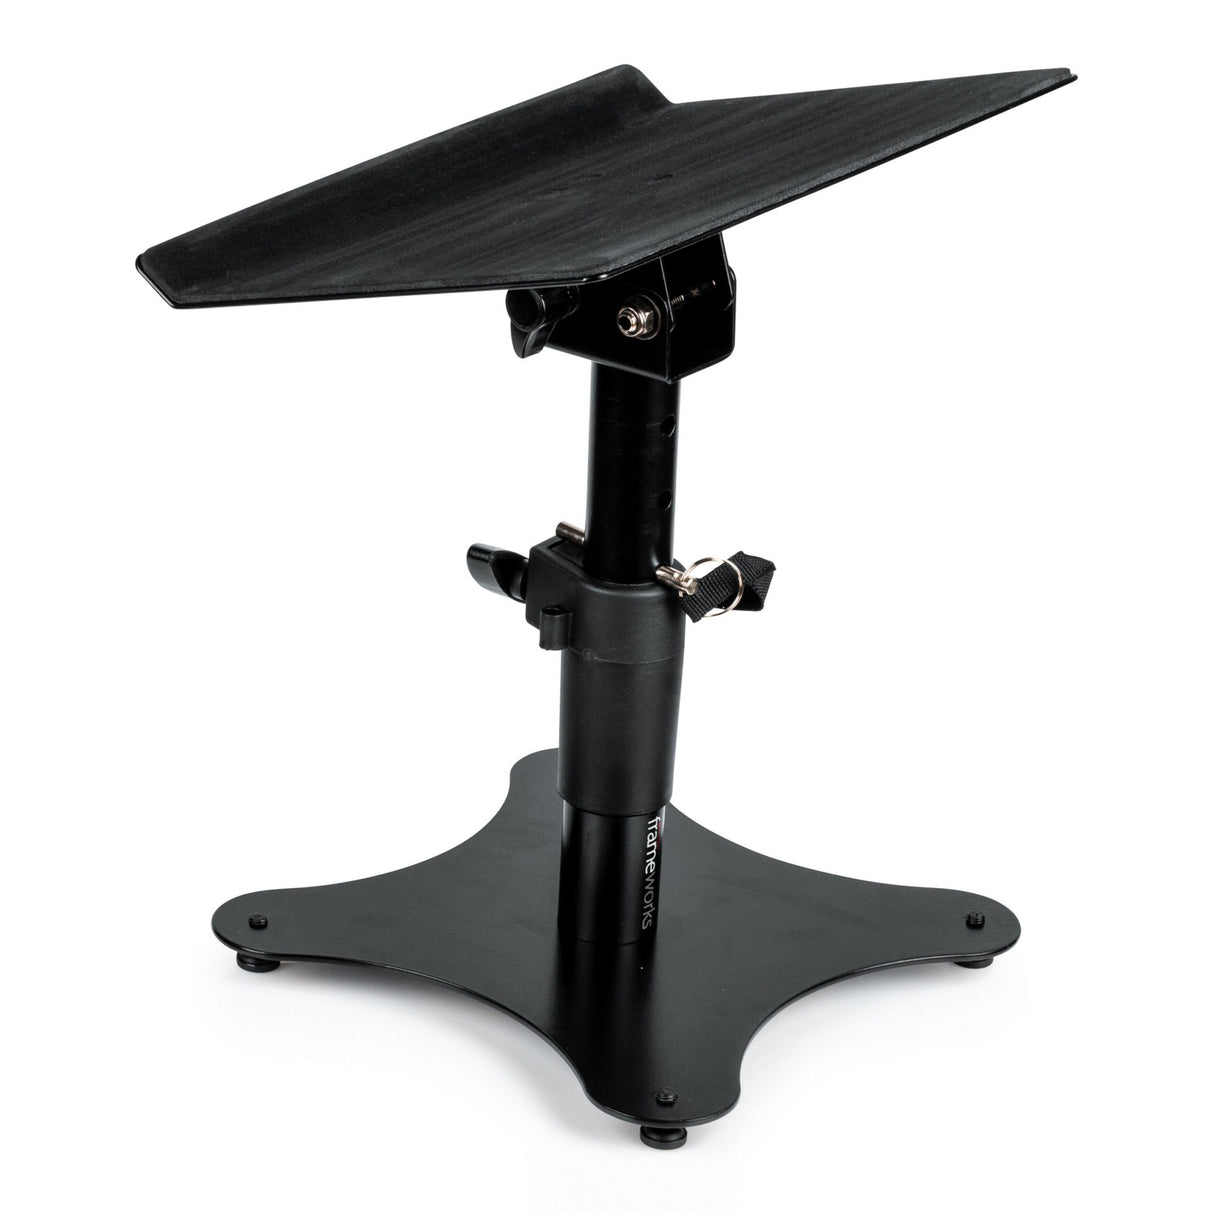 Gator GFWLAPTOP2000 Desktop Laptop and Accessory Stand